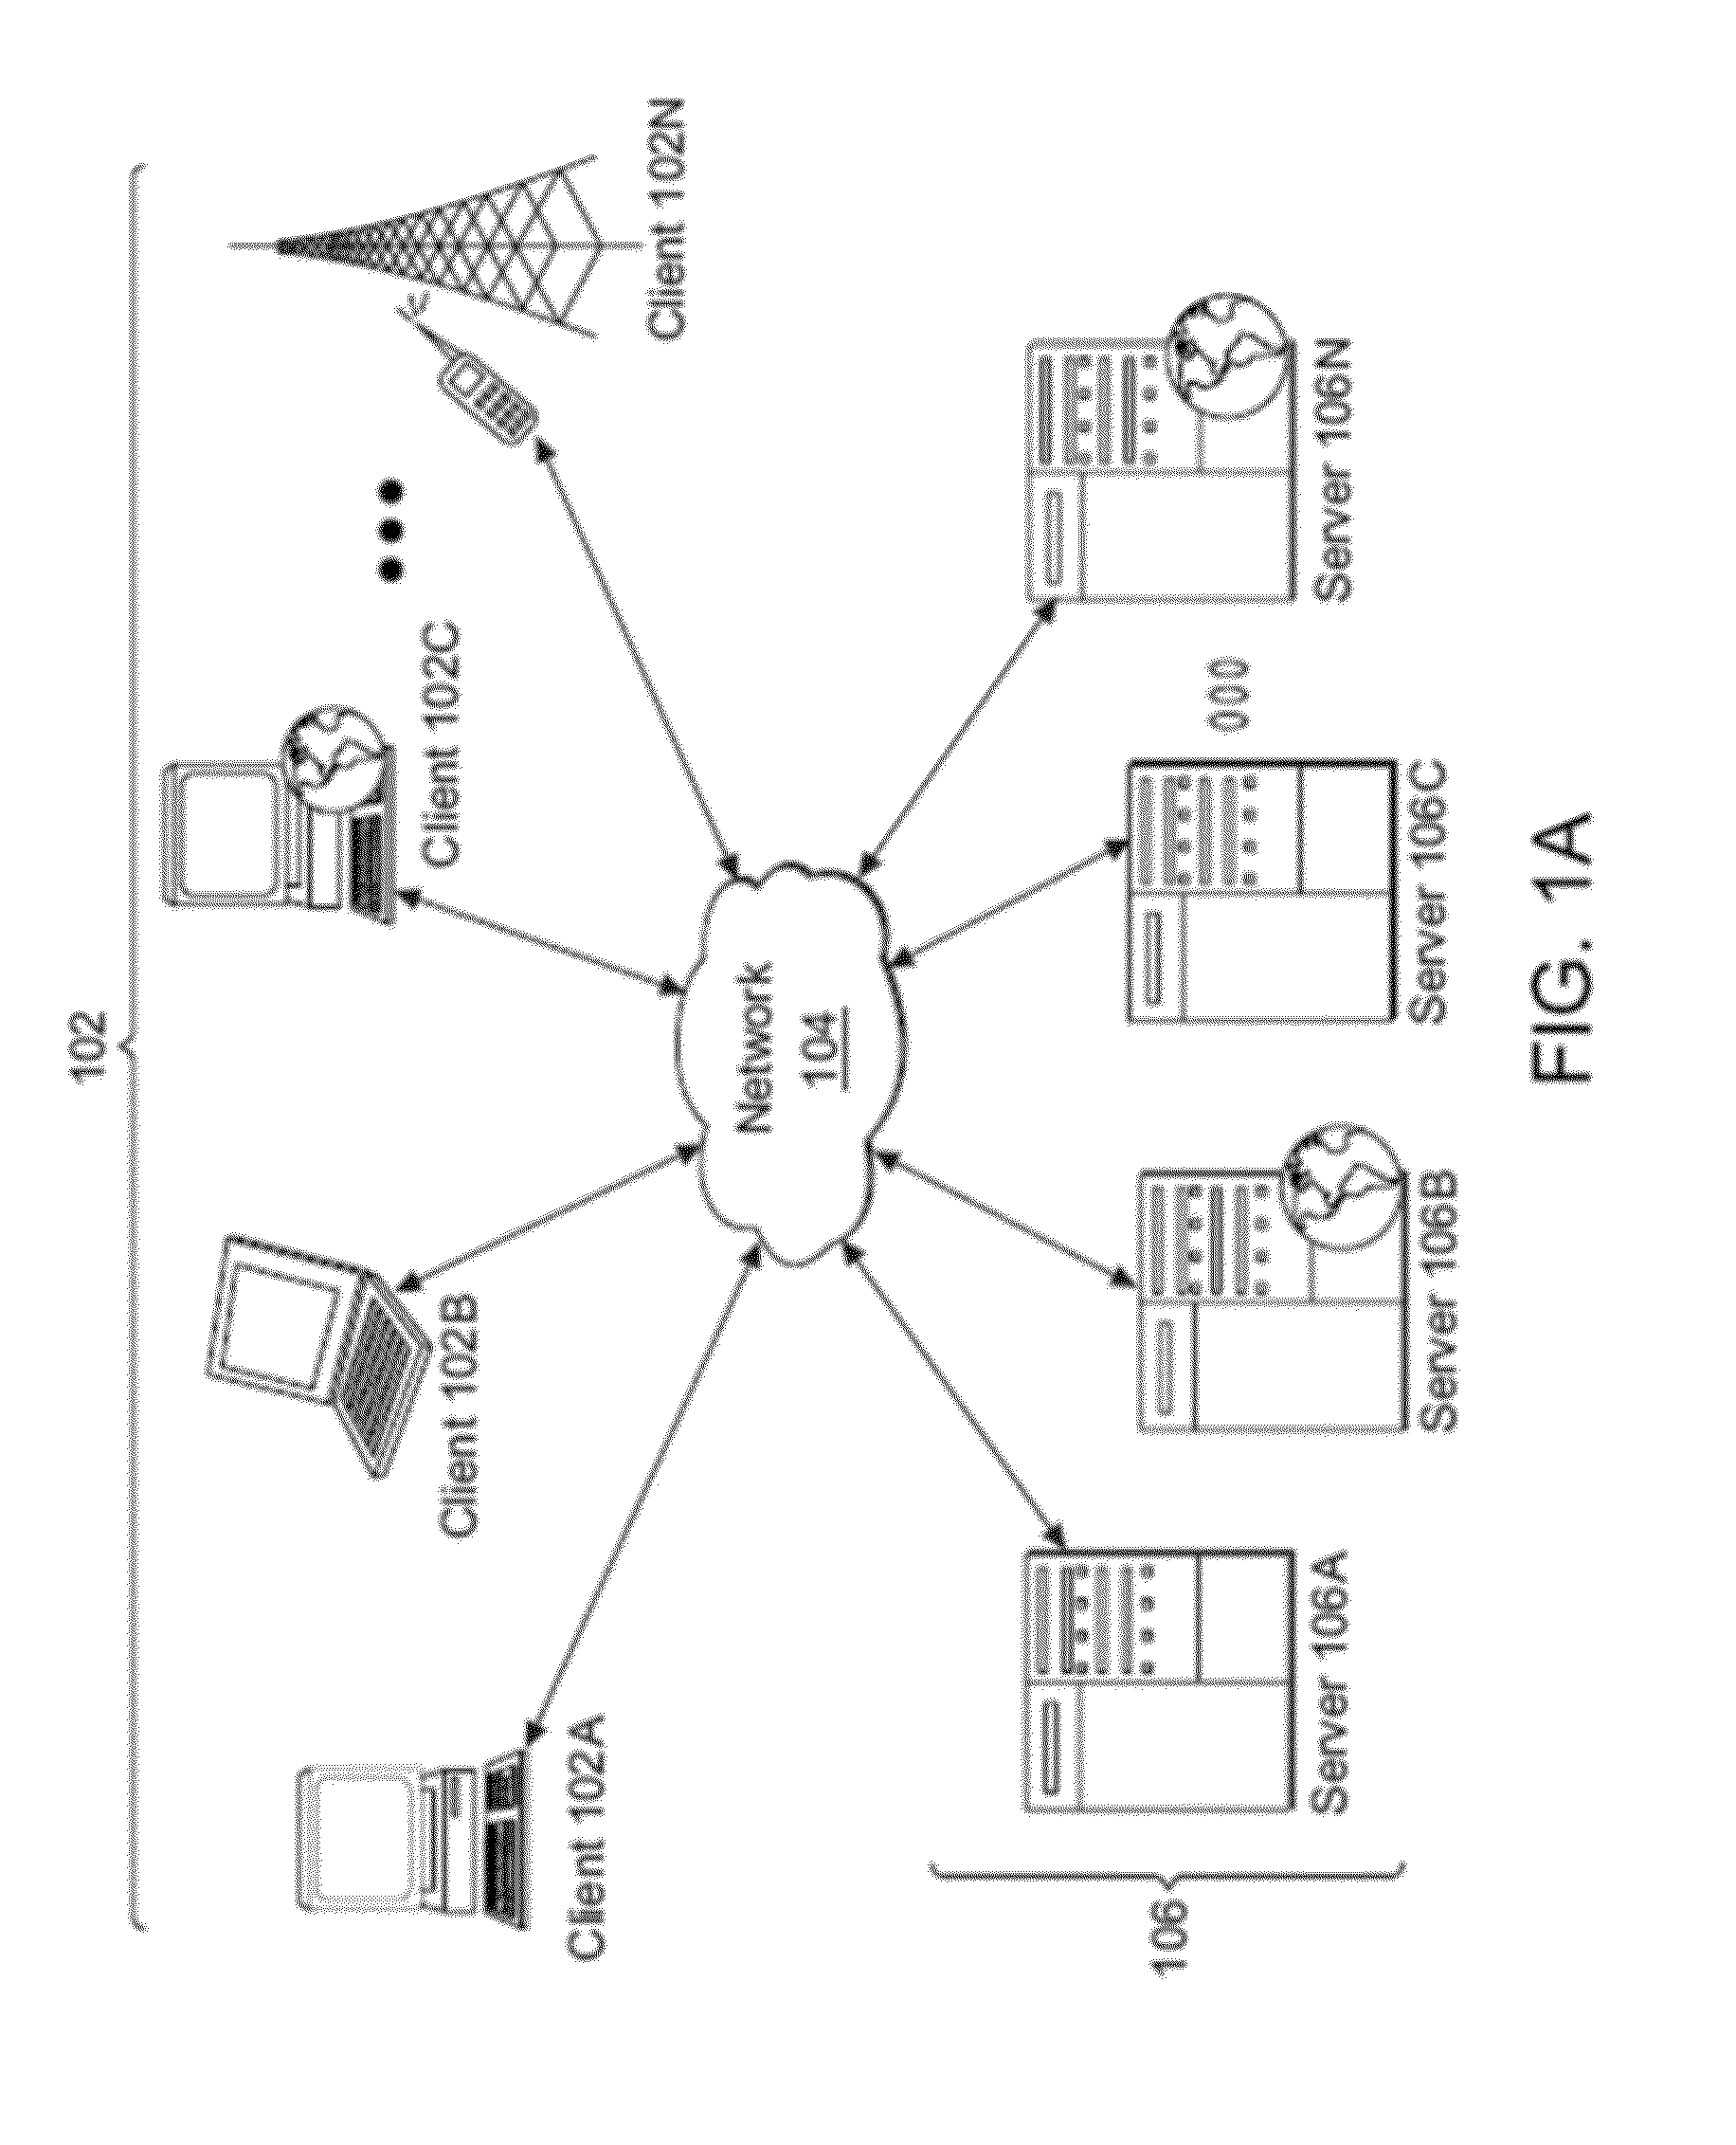 Systems and methods for providing a comprehensive initial assessment for workers compensation cases